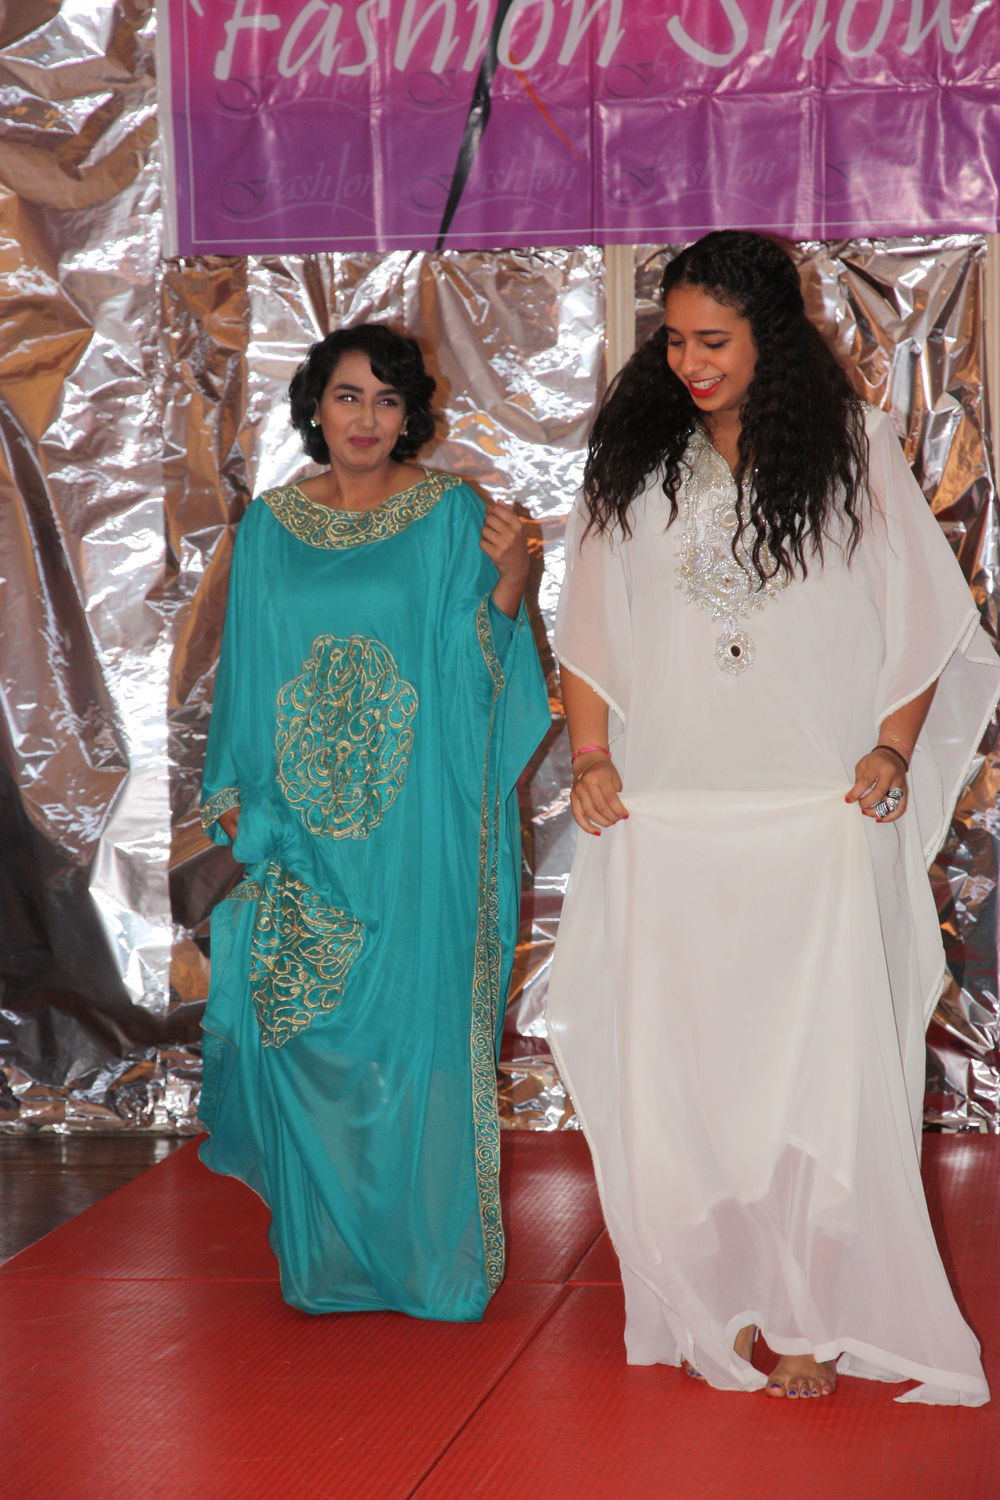 Tala at Monte Rosa's Fashion & Talent show (on the left)